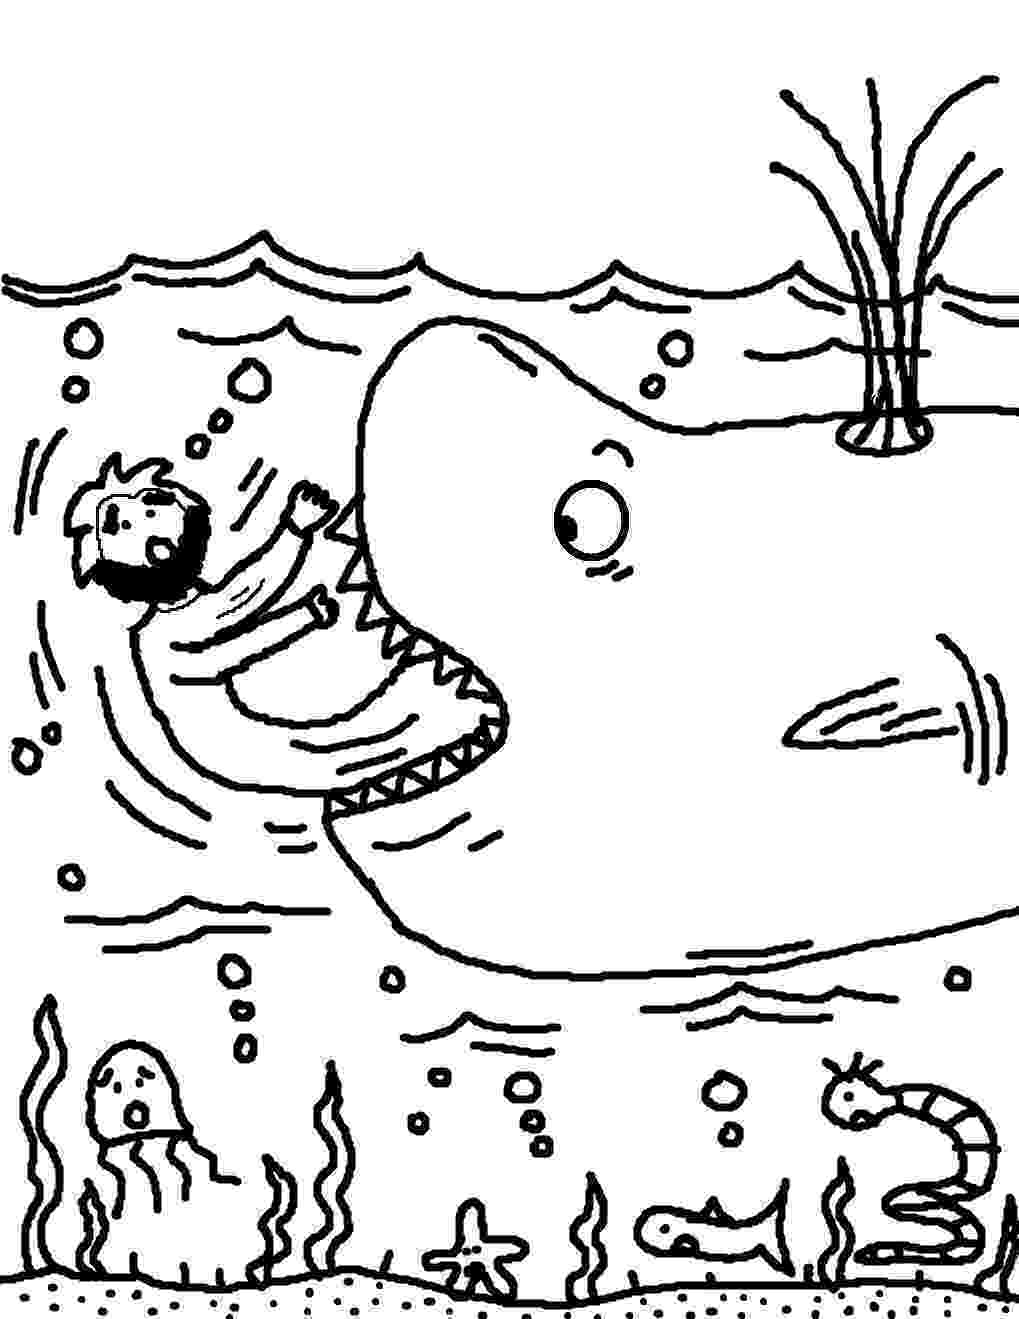 jonah and the whale coloring page free printable jonah and the whale coloring pages for kids and page whale coloring jonah the 